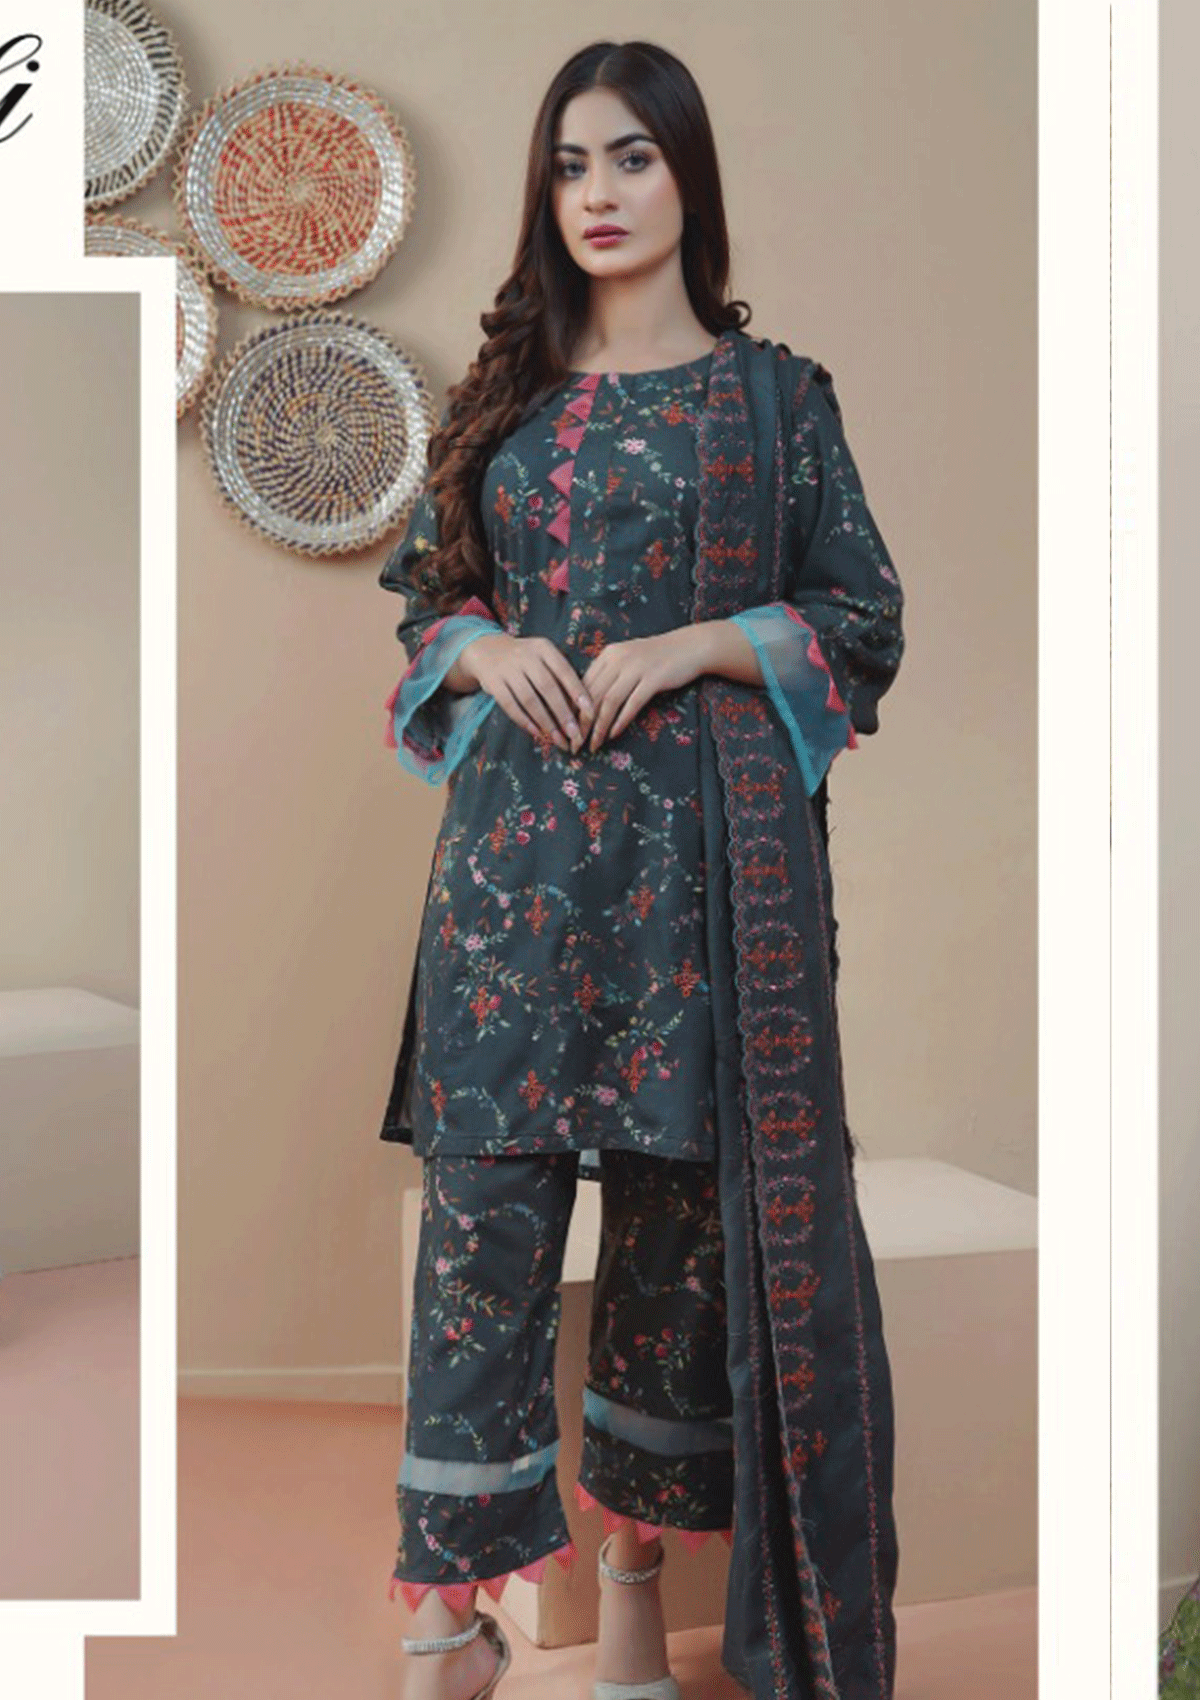 Winter Collection - Rangoli - Embroidered - REL#7 available at Saleem Fabrics Traditions